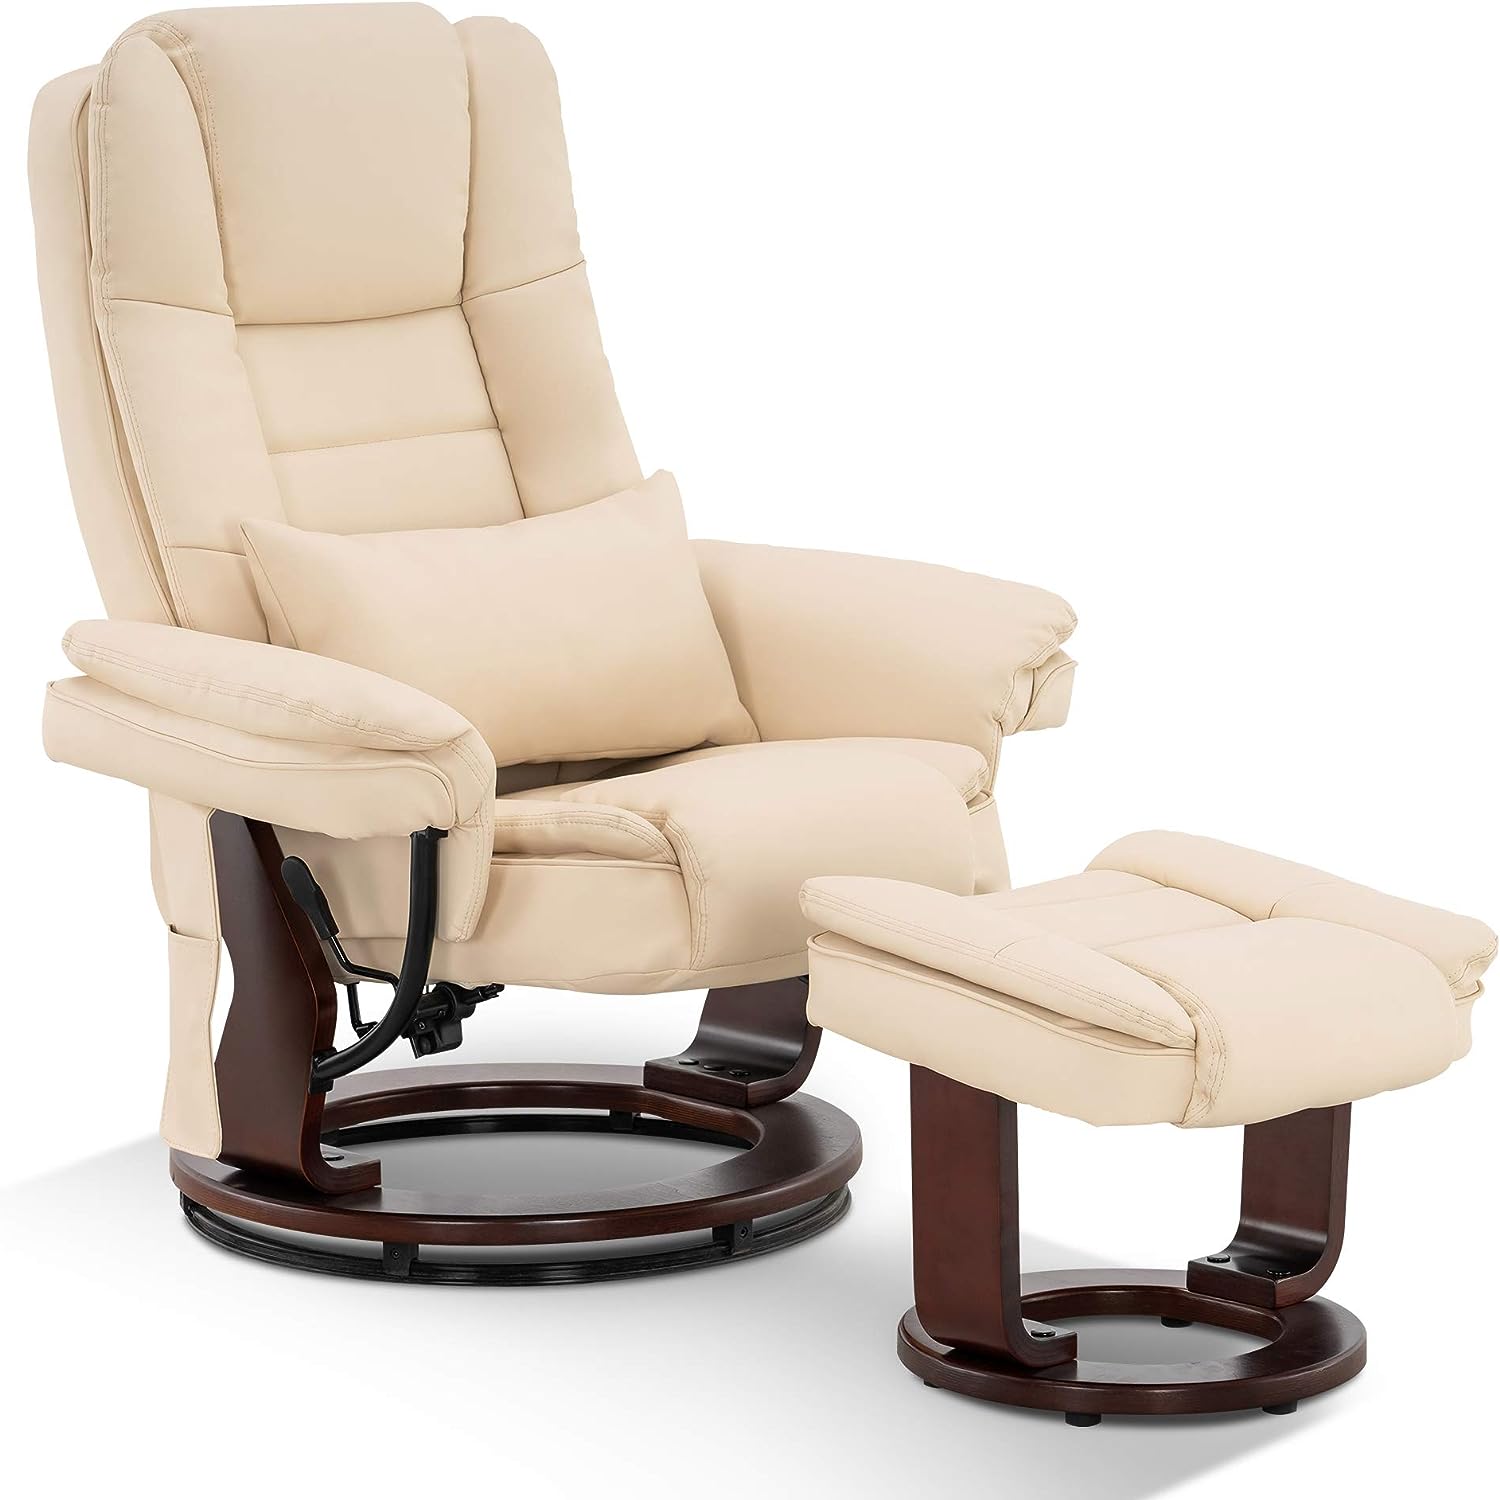 MCombo Recliner with Ottoman Chair Accent Recliner [...]